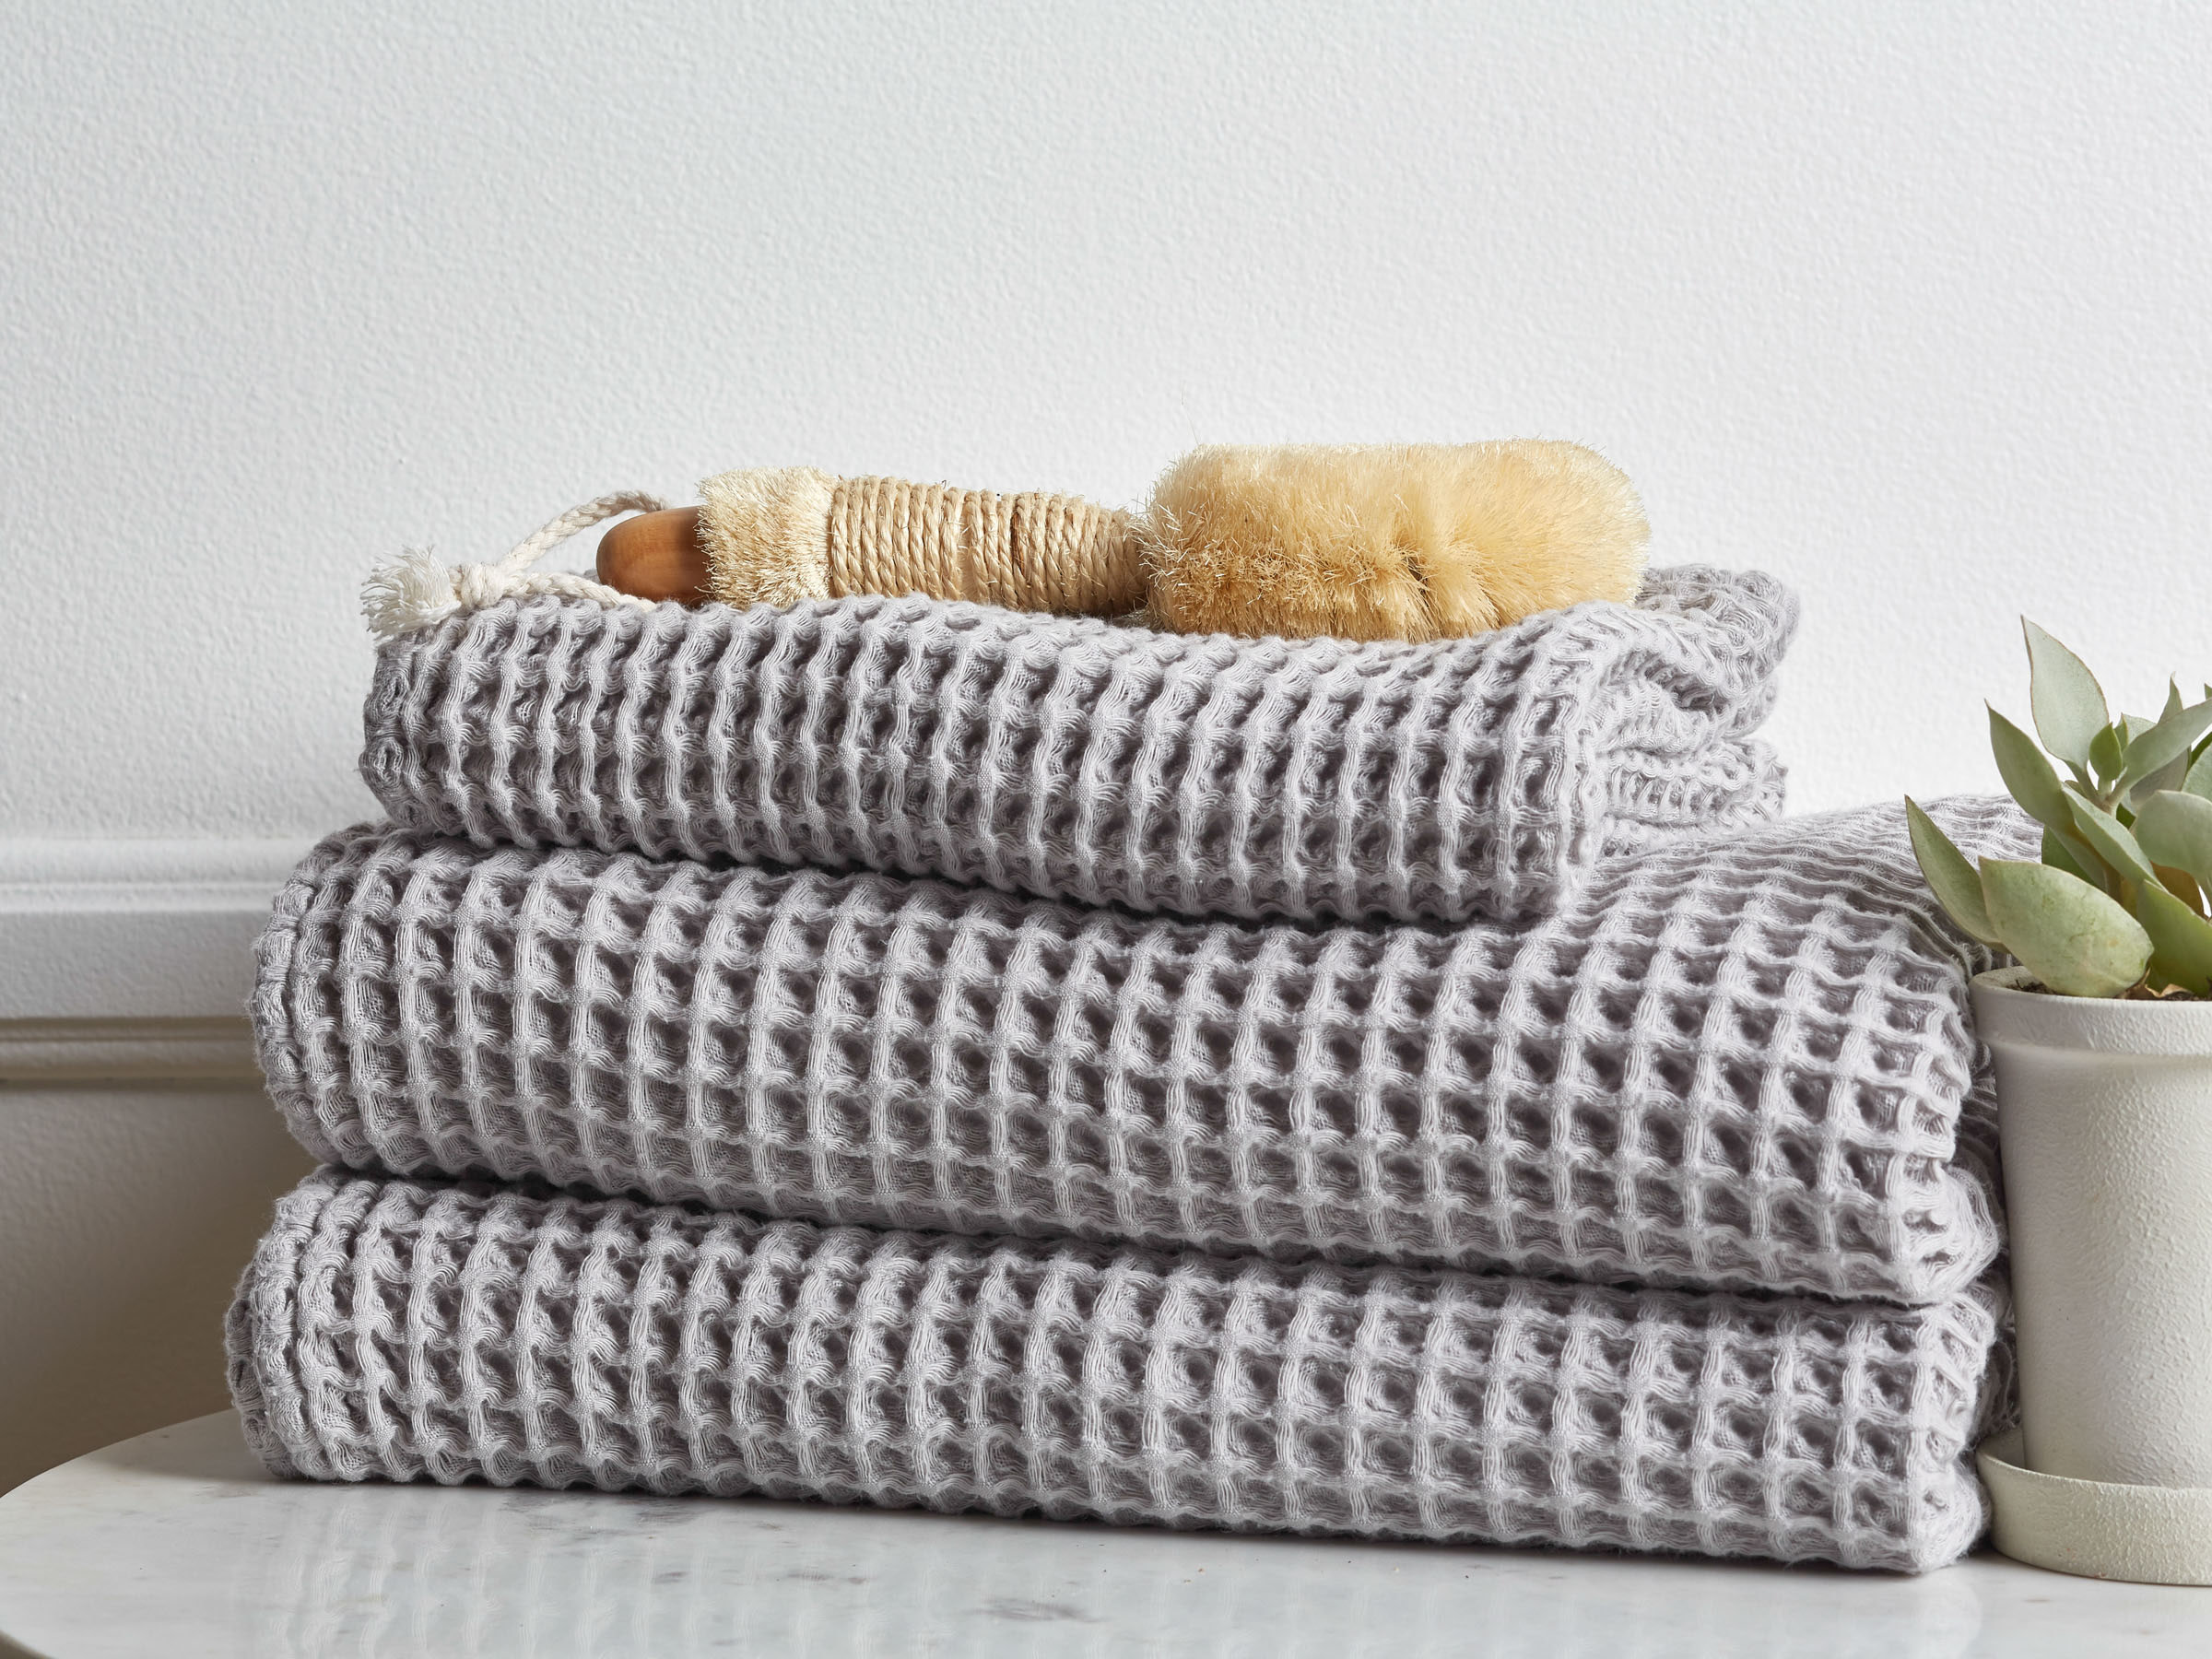 Grey Waffle Towels Shown In A Room